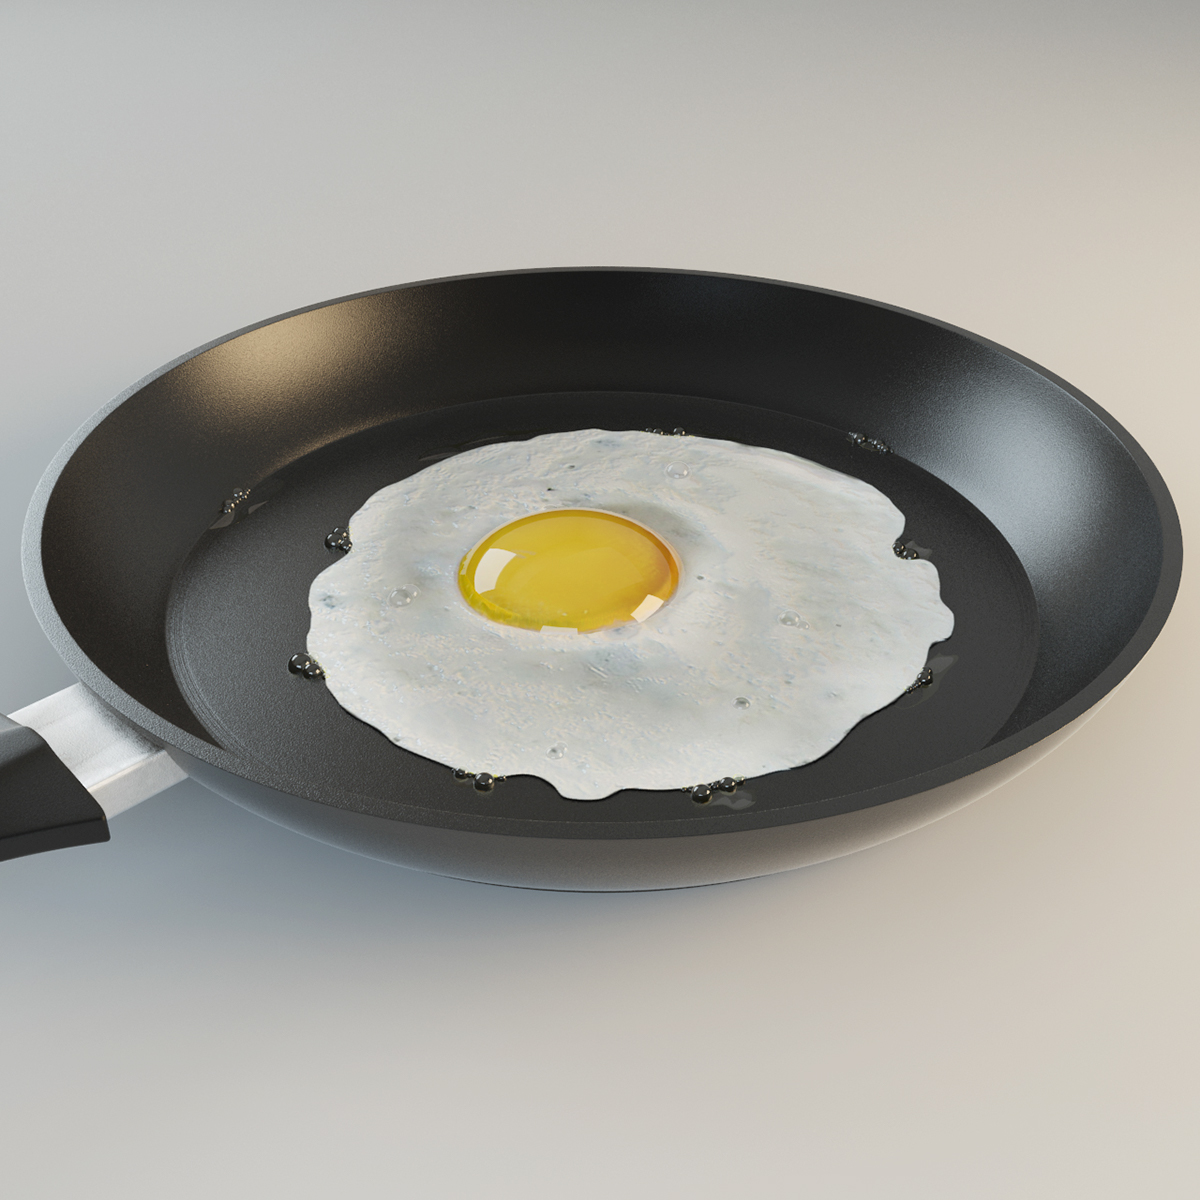 Frying pan with fried eggs Adhoma1988